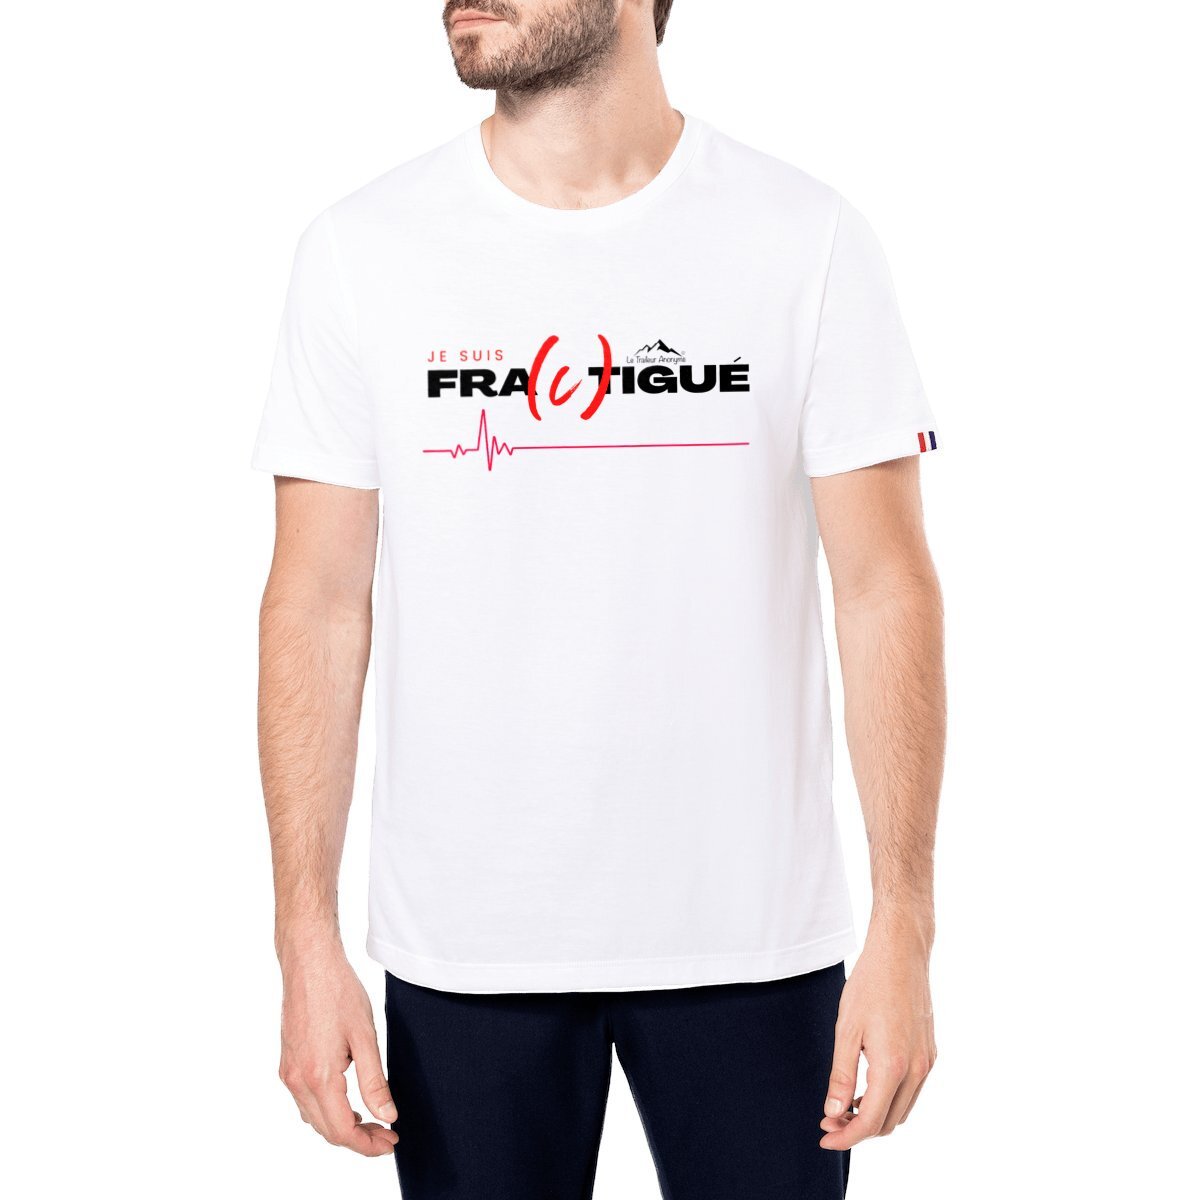 T-Shirt Coton Bio- 🇫🇷Made in France🇫🇷 - Homme -- Collection "Fractigué" (110) - Le Traileur Anonyme